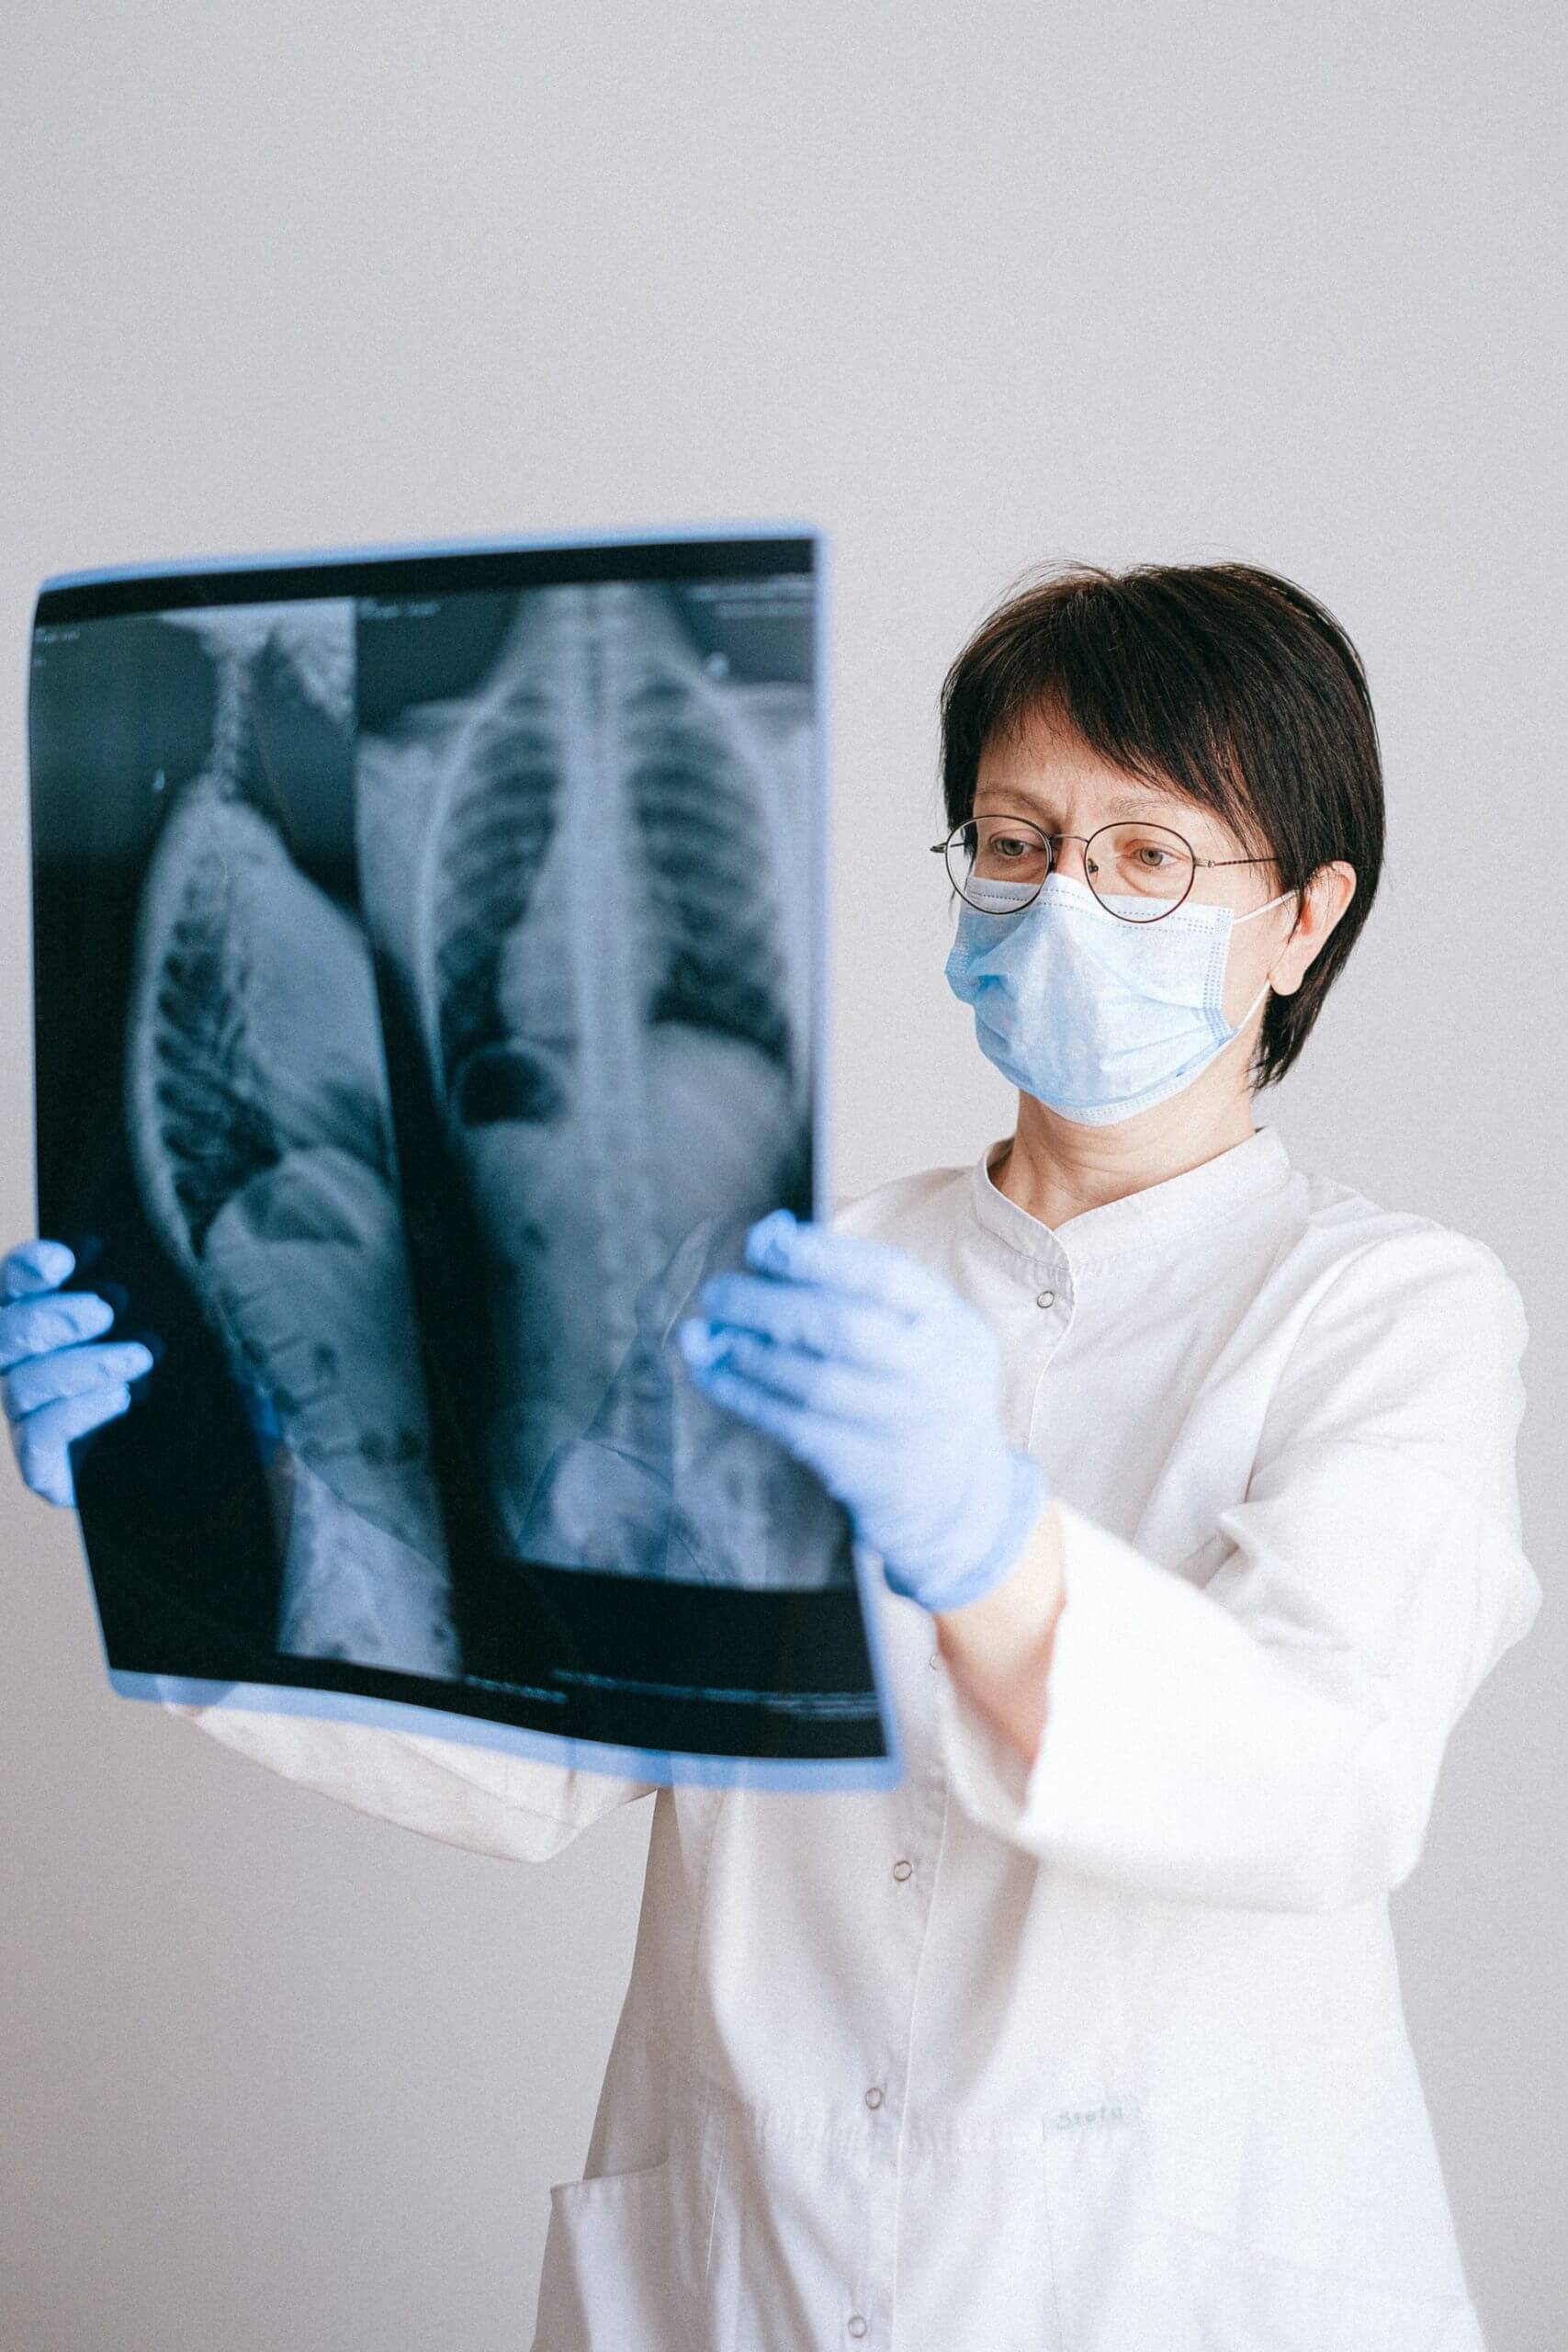 All about pulmonary fibrosis, the fatal disease that can leave one breathless